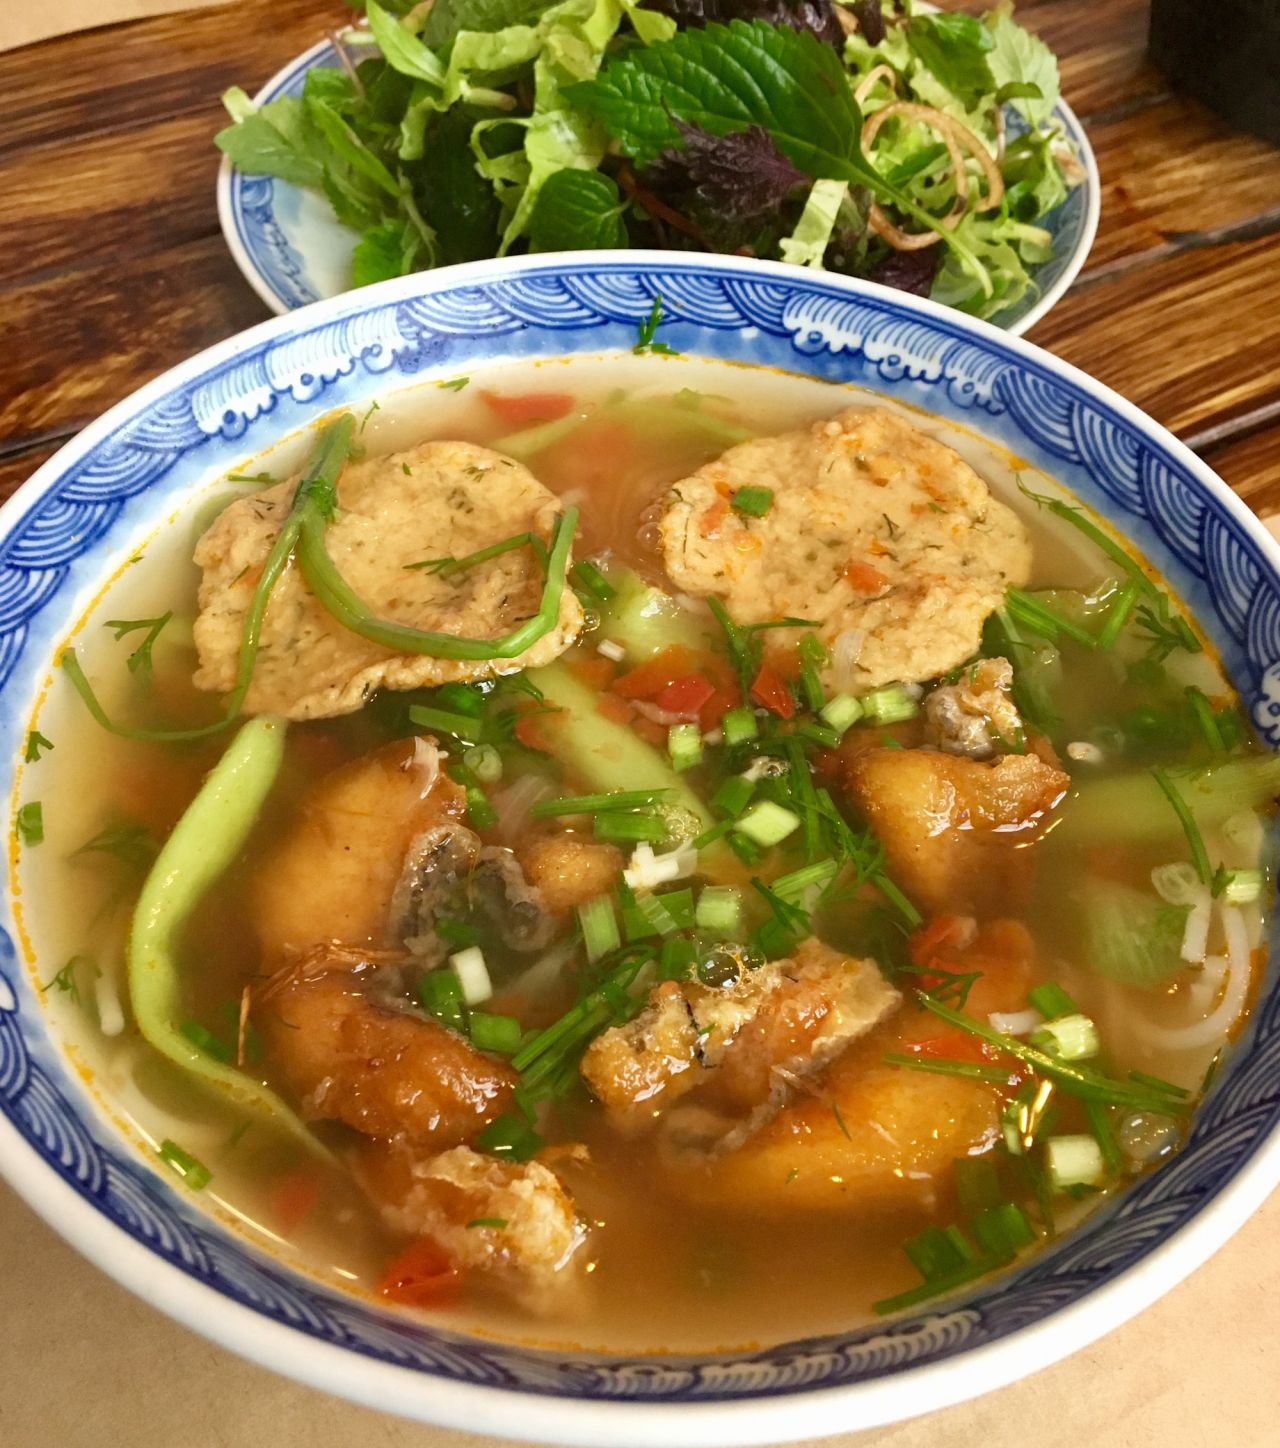 One of the most popular dishes in Haiphong is bún cá, literally meaning "fish noodles."